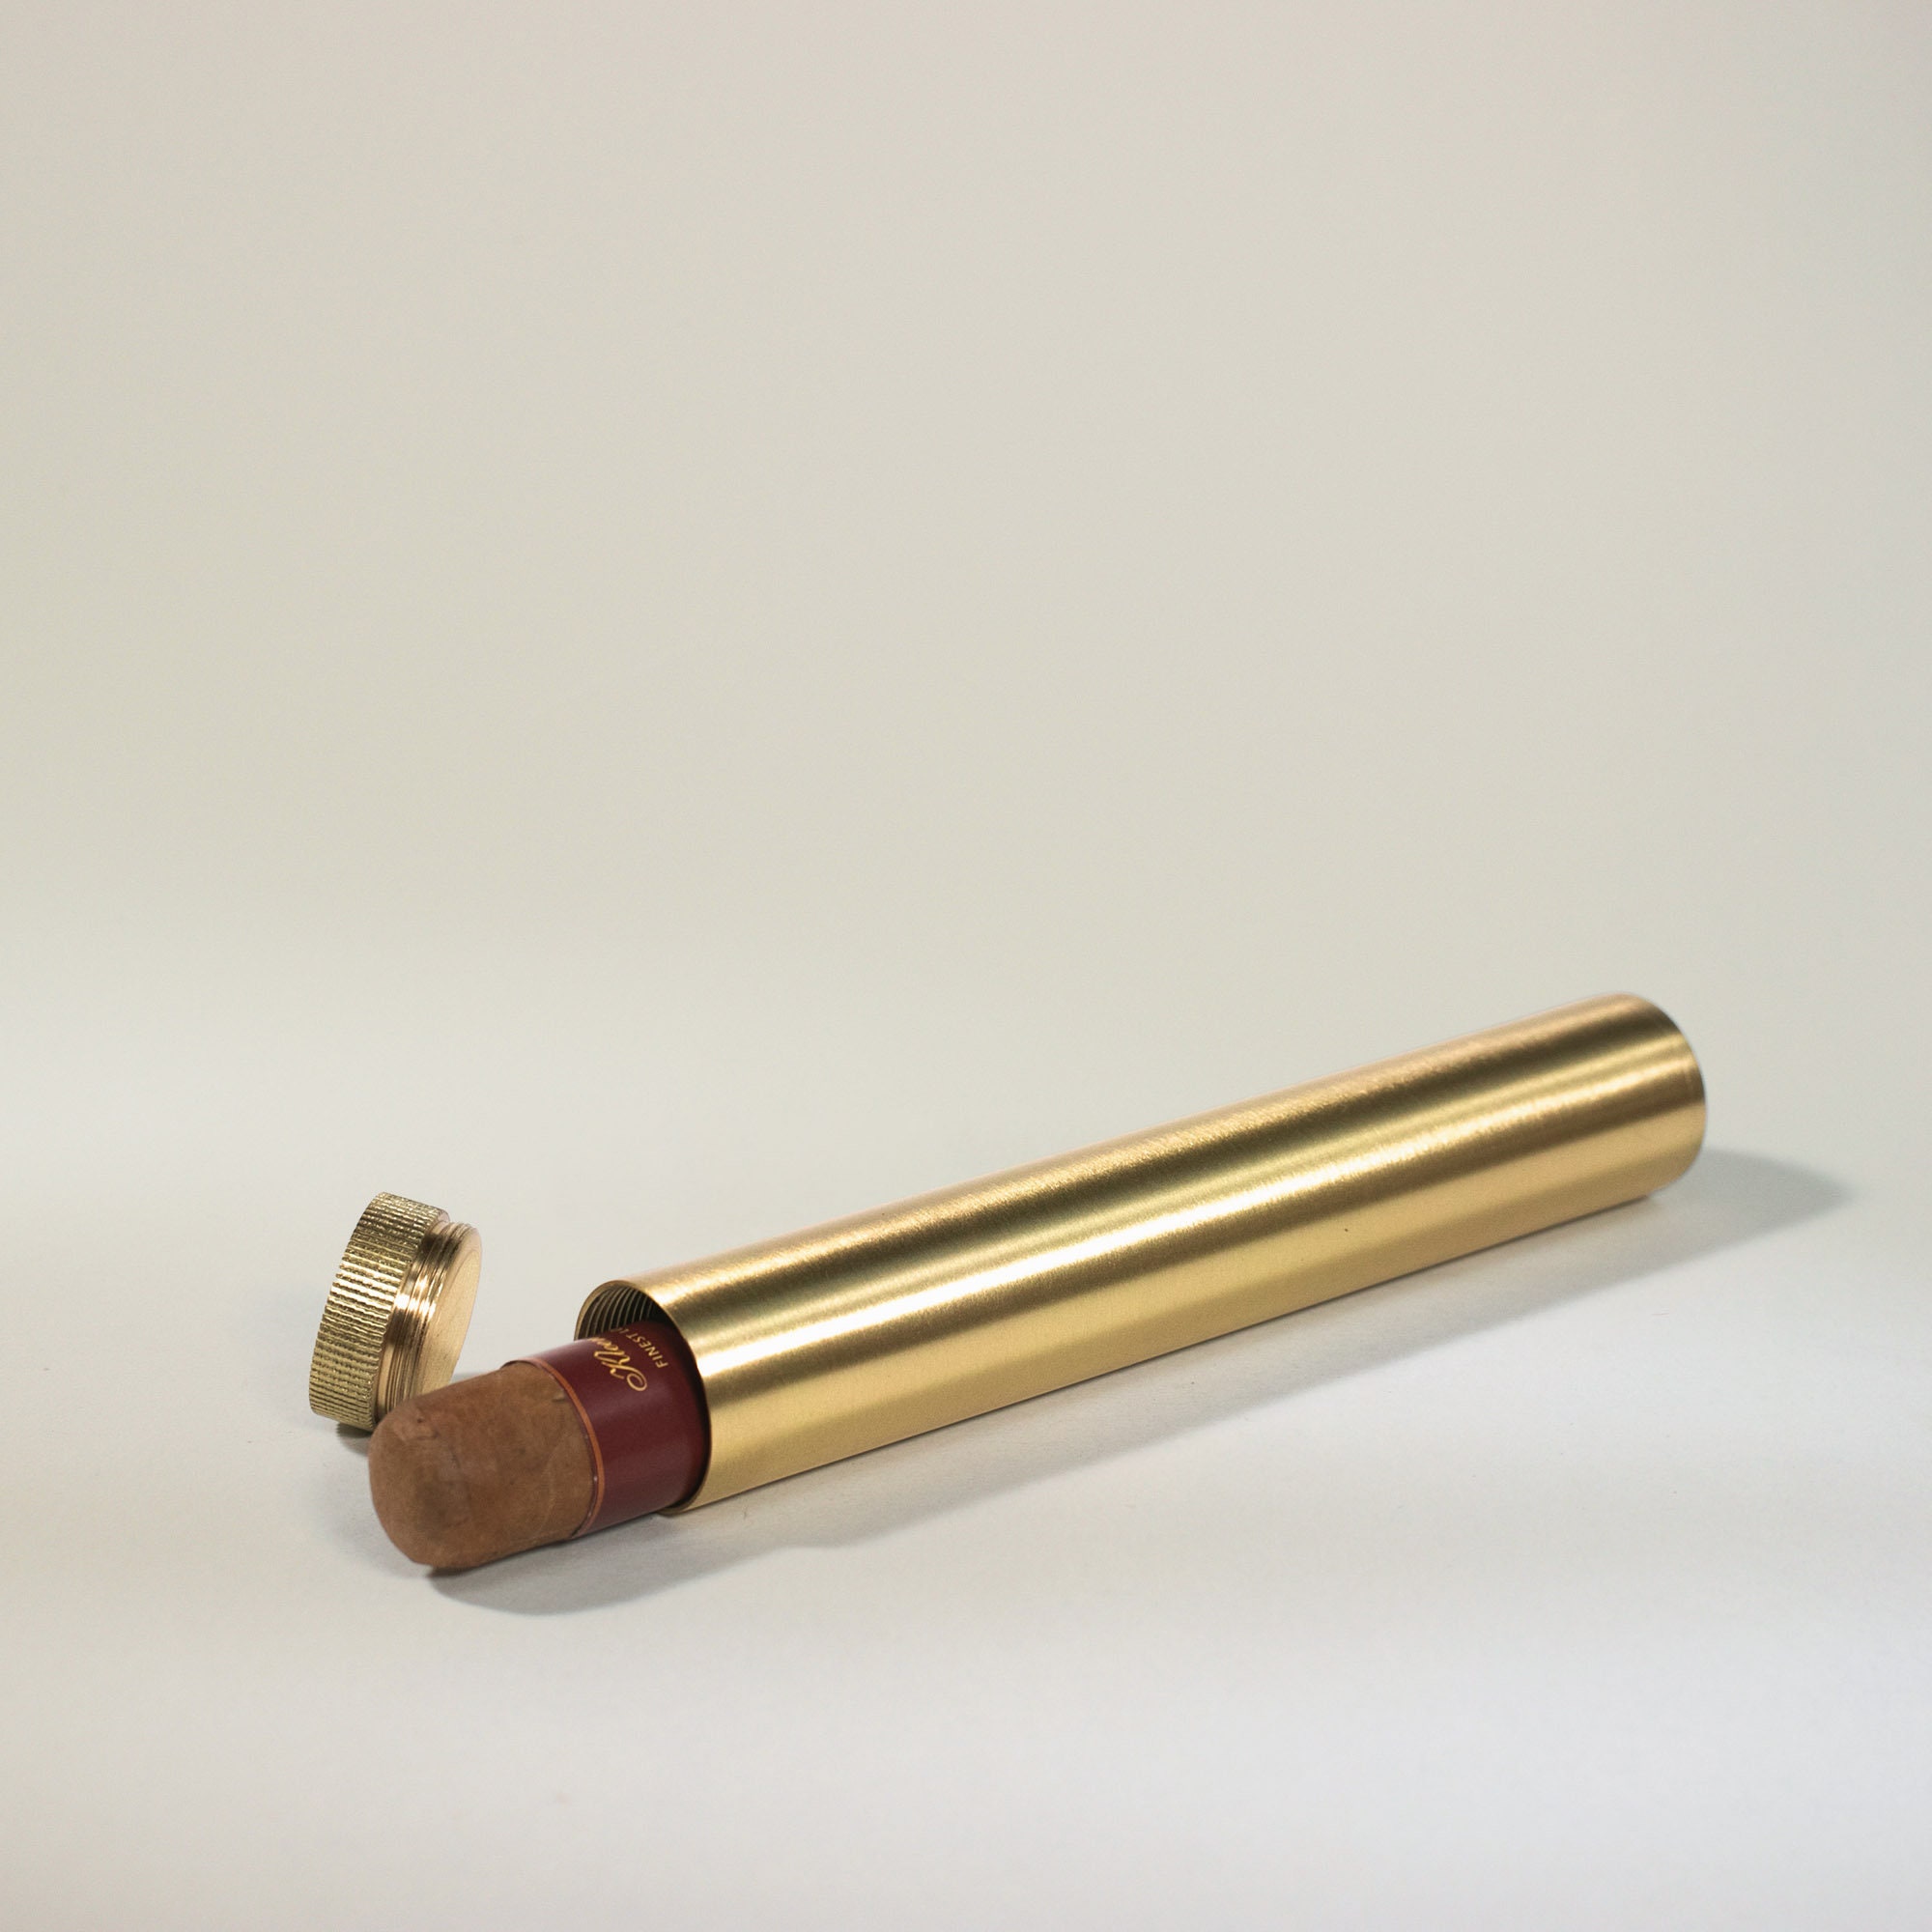 Solid Brass Doob tube for Storing & Preserving Cannabi · Lacannapa